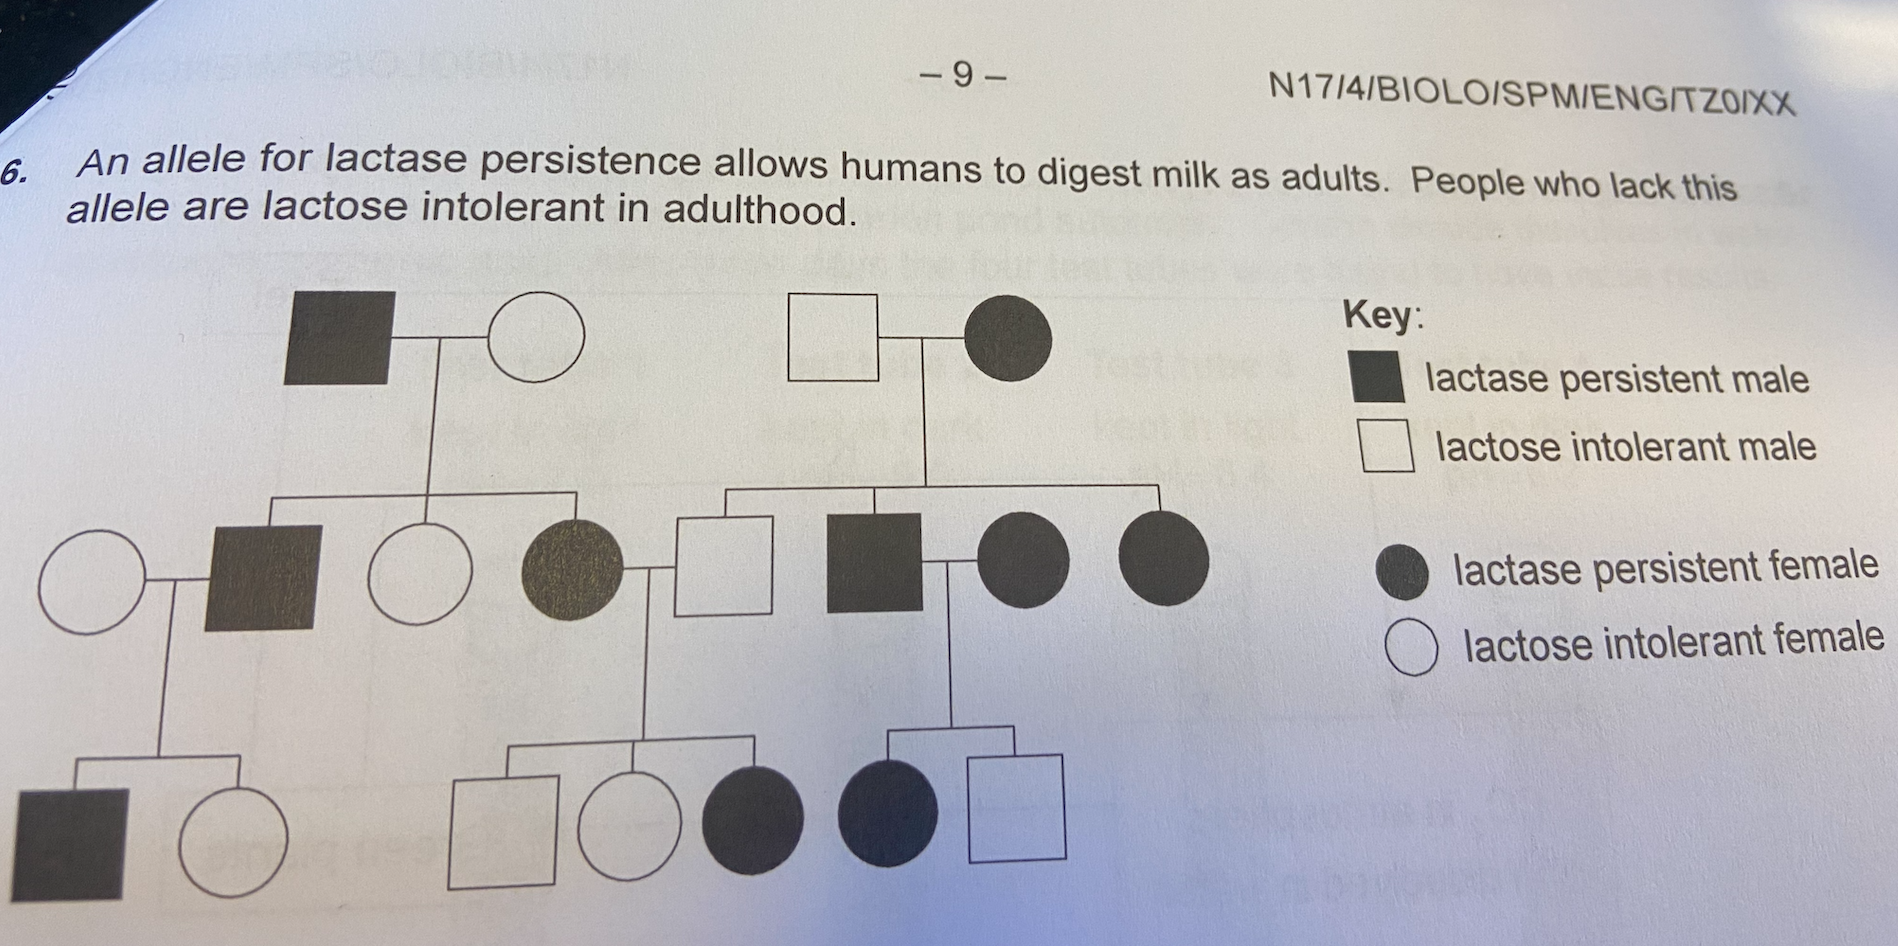 <p>An allele for lactase persistence allows humans to digest milk as adults. People who lack this allele are lactose intolerant in adulthood.</p><p>What is the pattern of inheritance?</p>